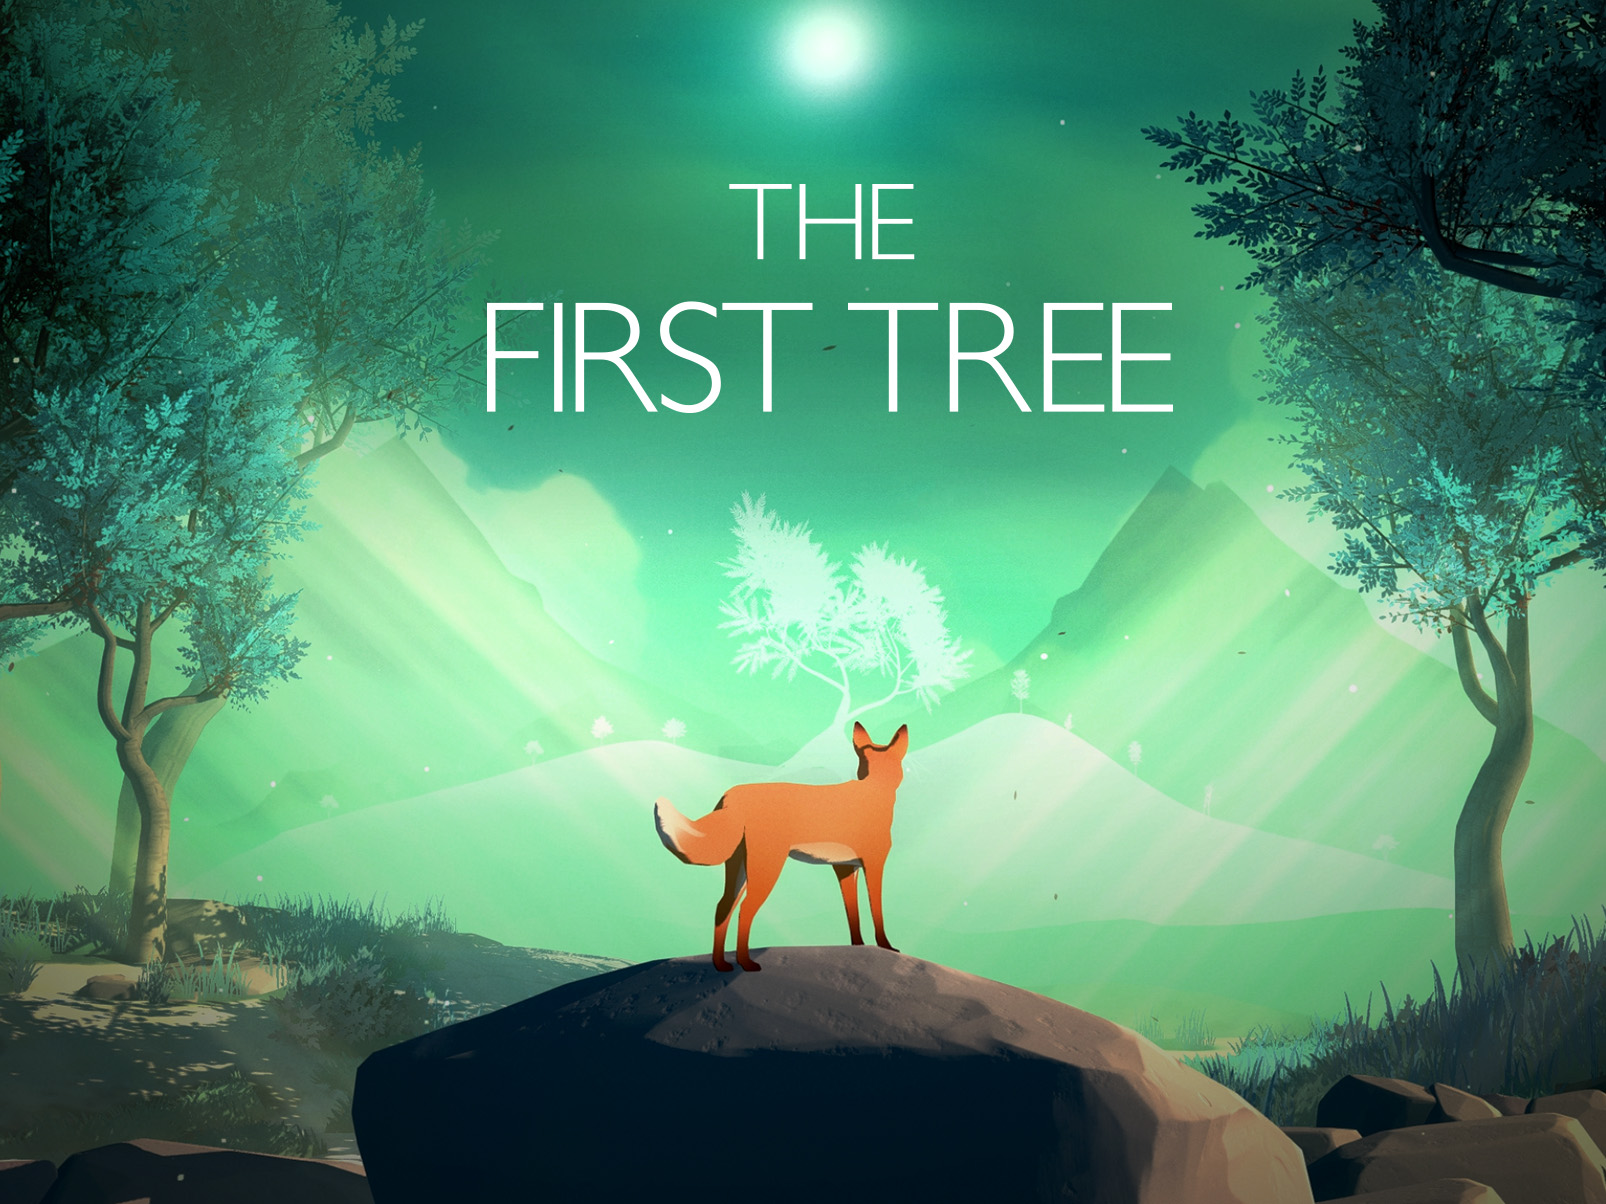 download the first tree nintendo for free